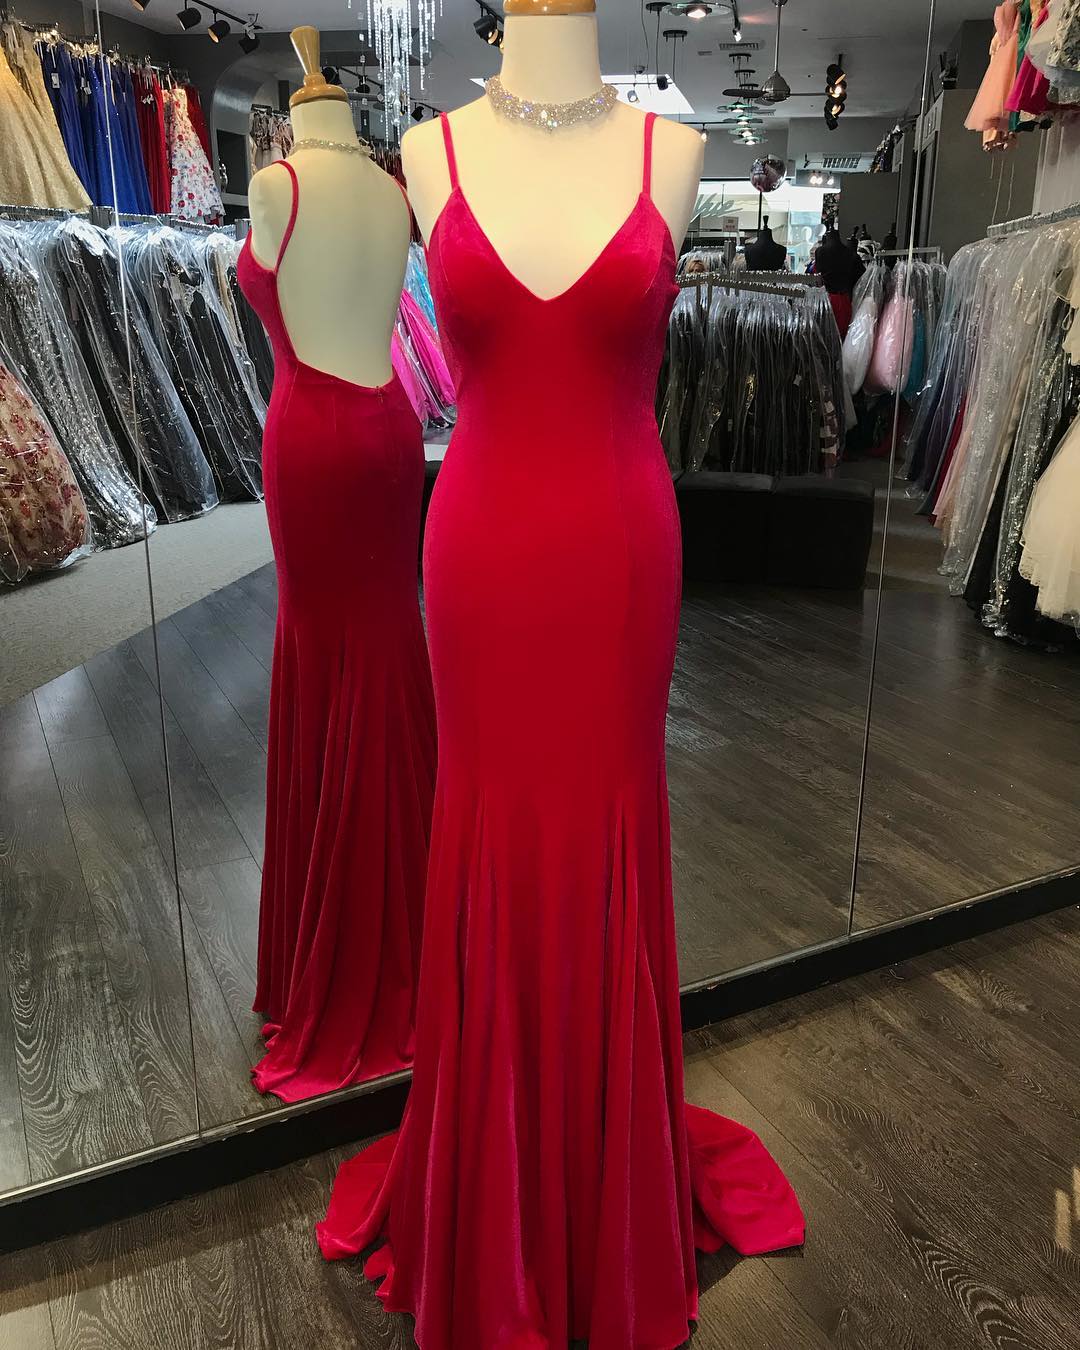 Red Mermaid Prom Dress, Sexy Backless Prom Dresses, Long Spaghetti Straps Evening Party Dress,pd141126